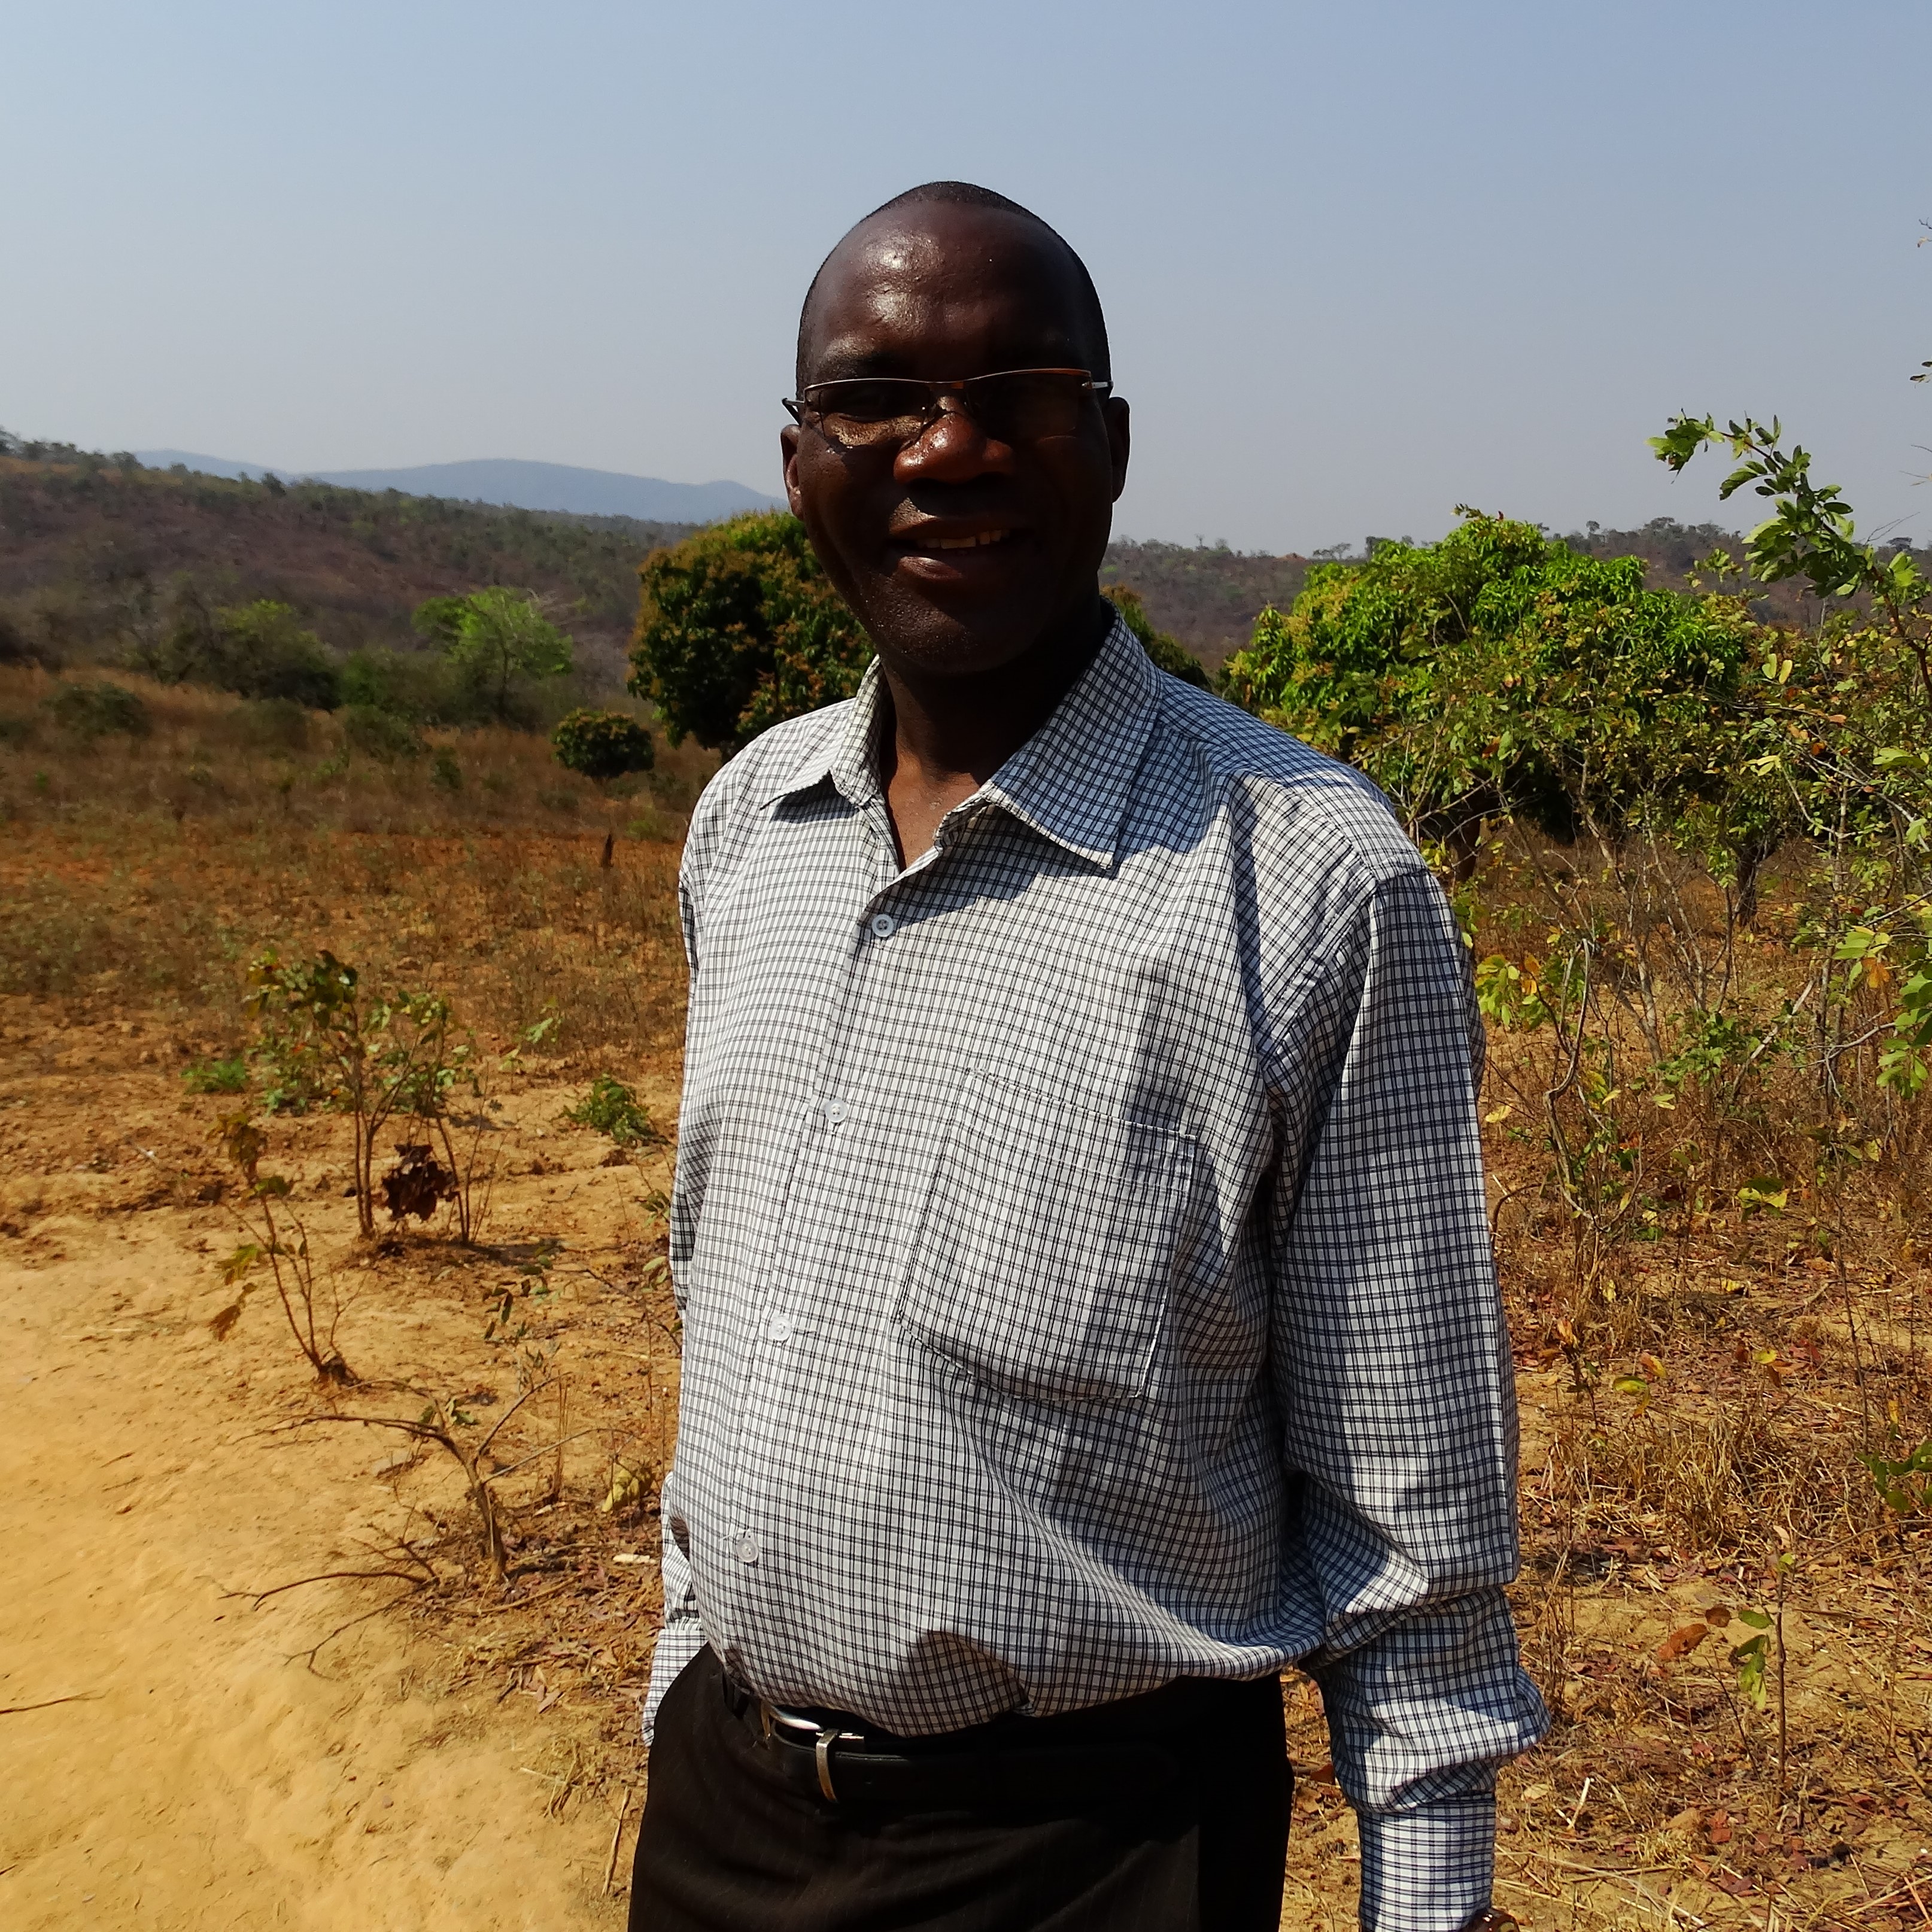 Rev. Gerald Phiri after dropping off YAVs to spend four days with his parishioners in Chimwangombe Village, September 2018.